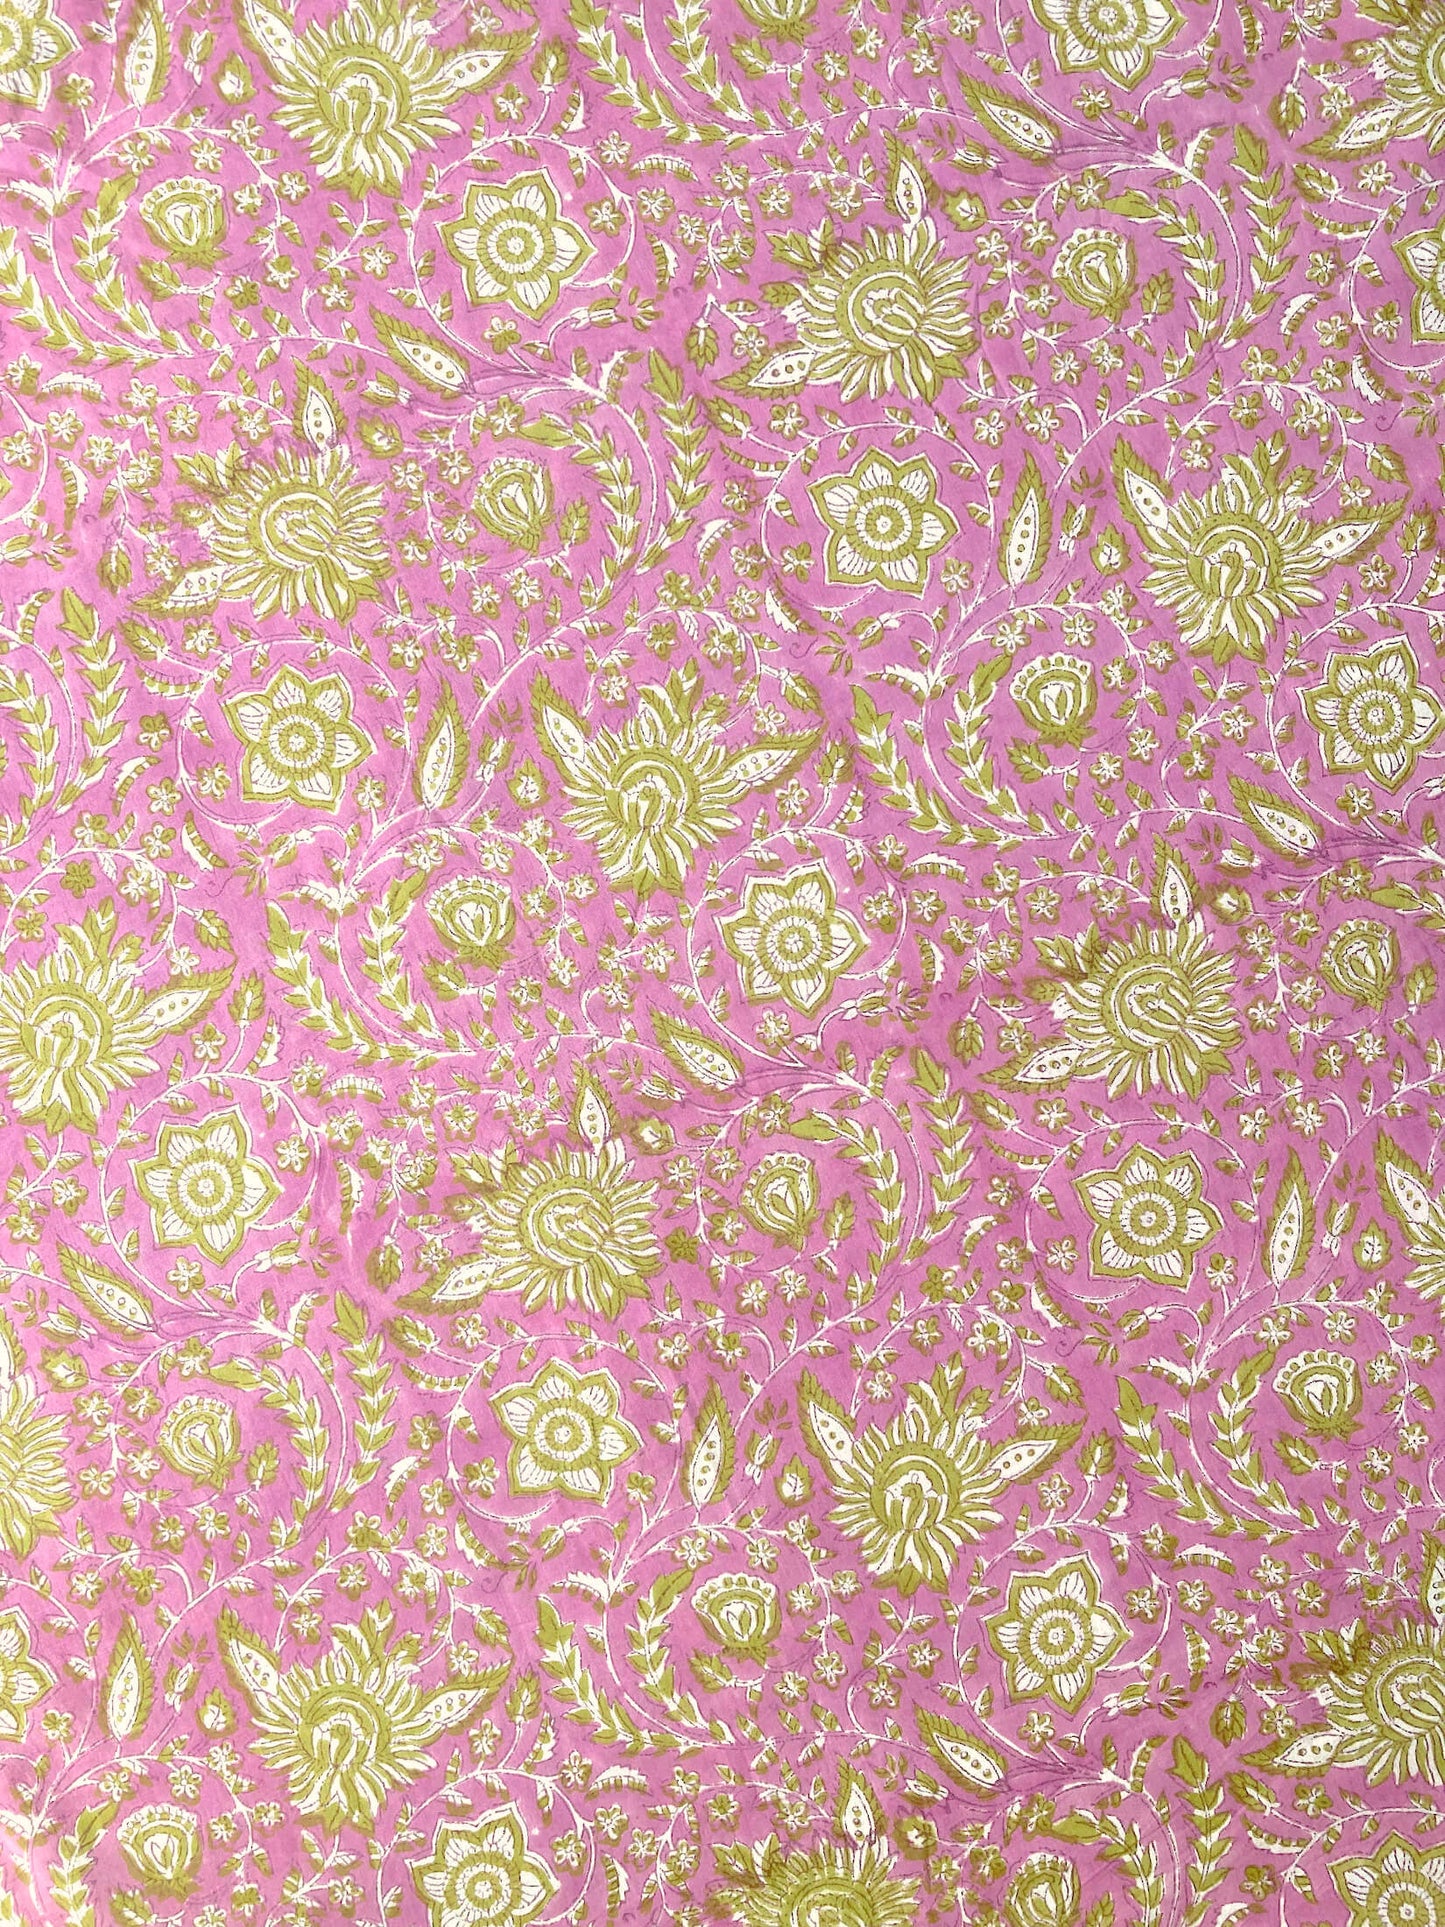 Hand Block Printed Cotton Fabric Pink x Olive #173-5